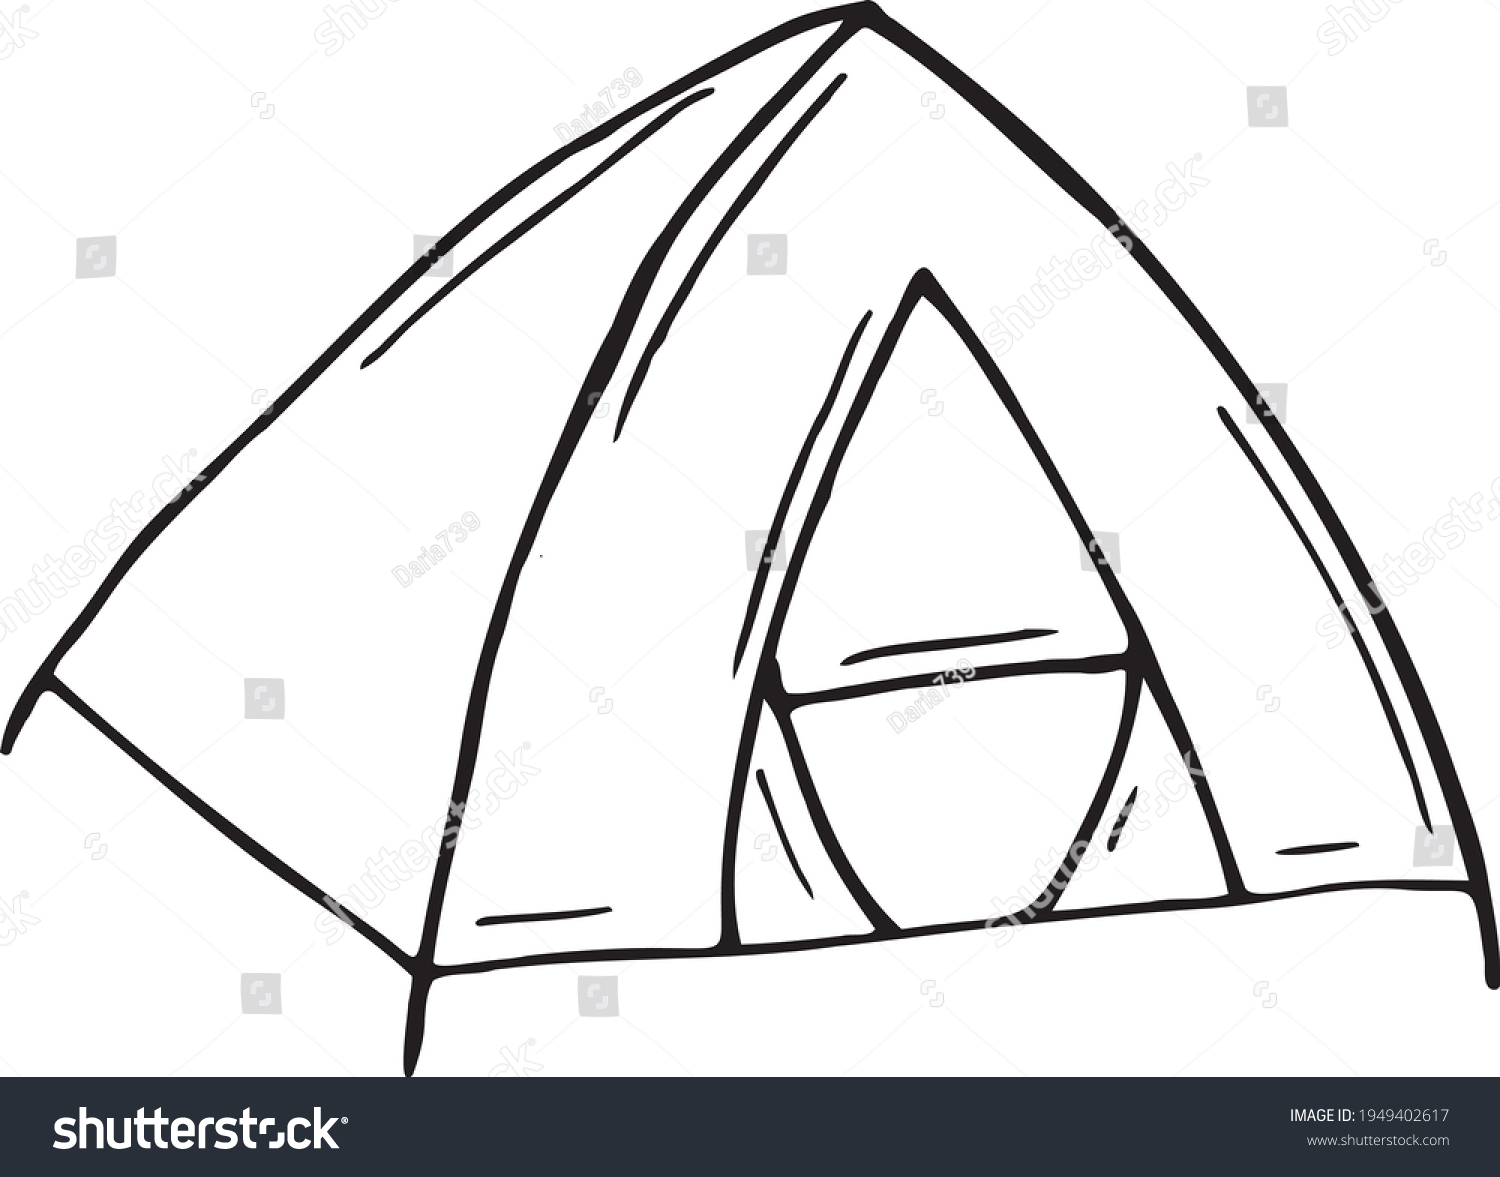 SVG of Camping Tent drawn vector doodle illustration. Camping element. Isolated on white background. Hand drawn simple element svg